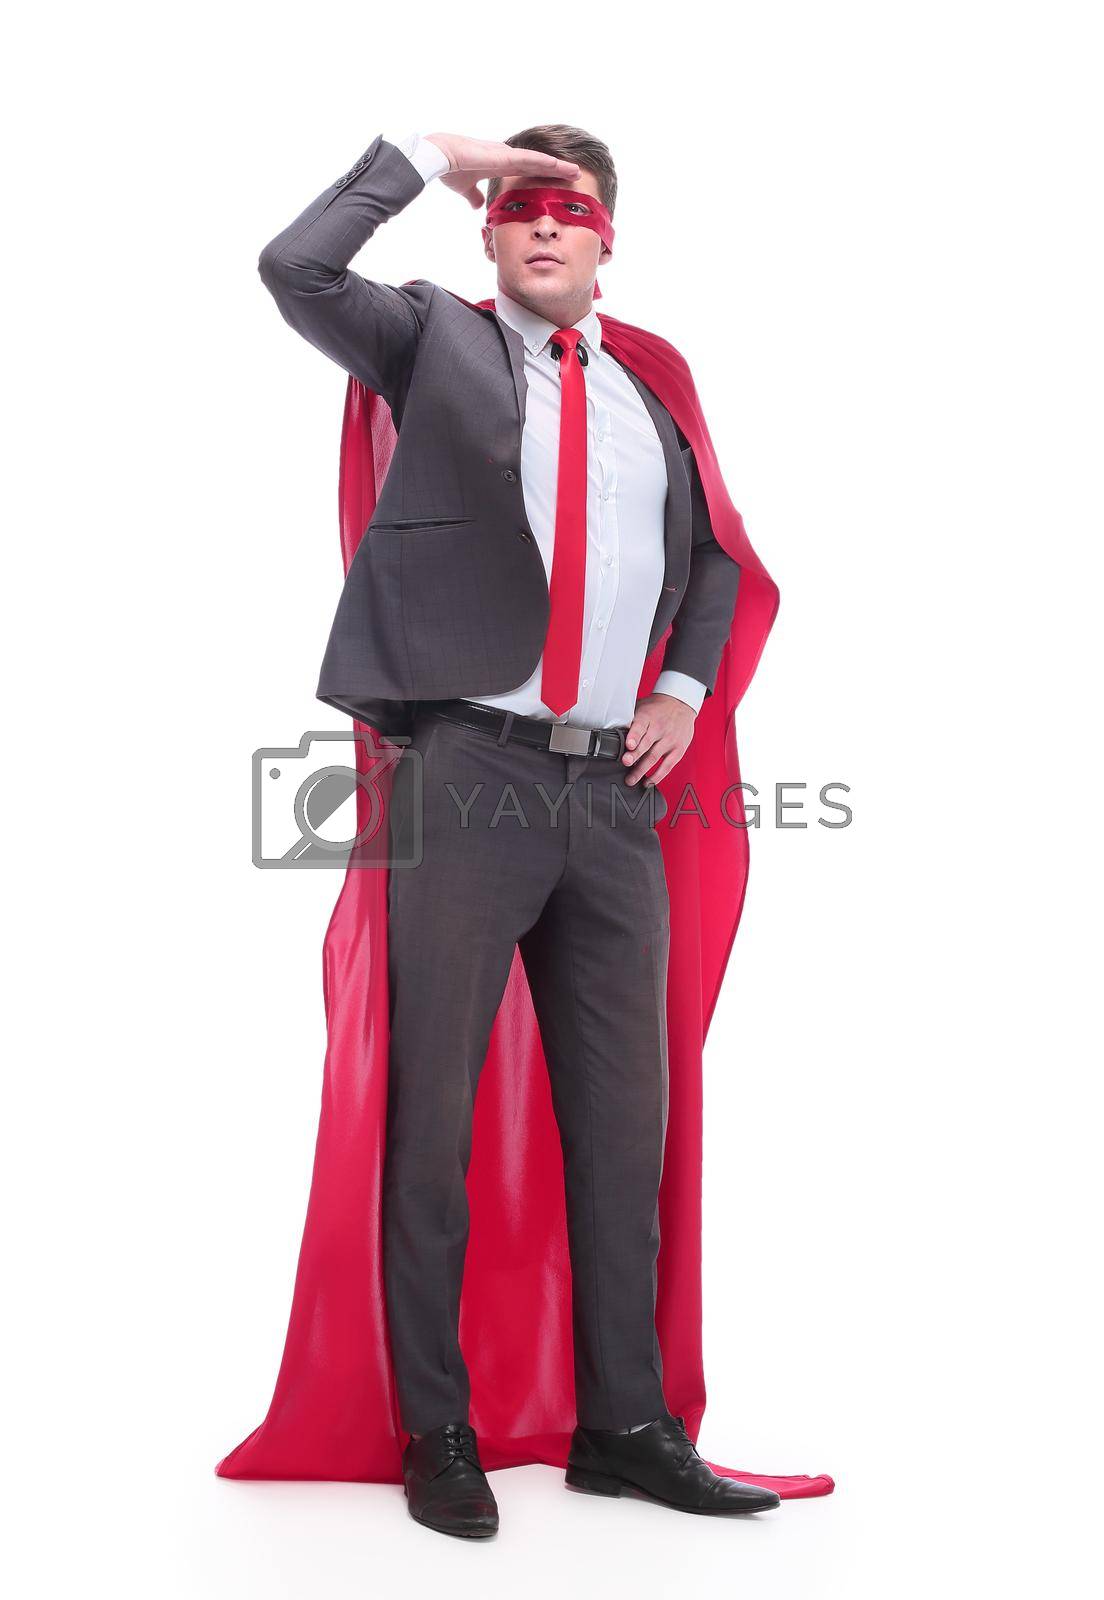 Royalty free image of attentive superhero businessman looking into the distance by asdf